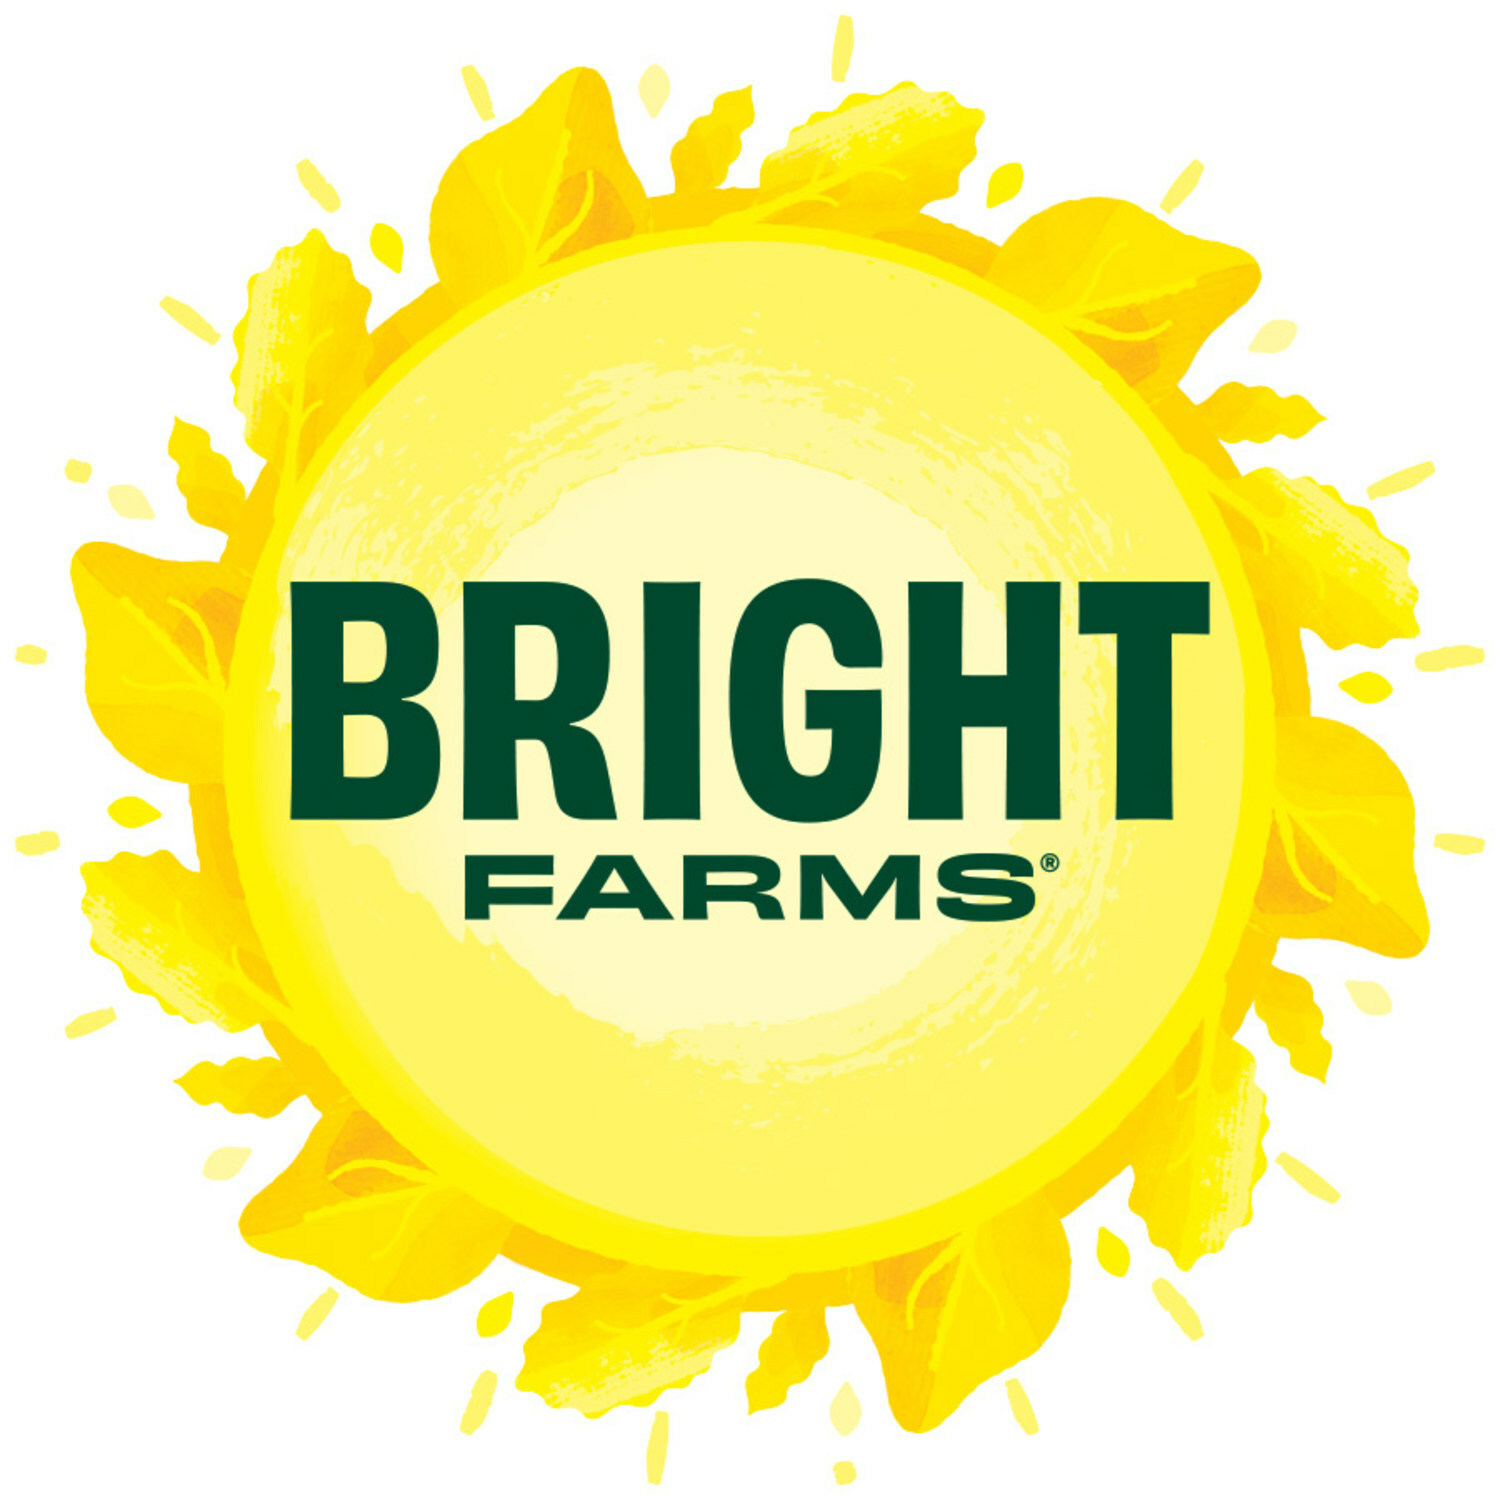 BrightFarms is a national leader in the booming indoor farming industry, transforming how produce is grown and delivered with its expanding network of high-tech, sustainable hydroponic farms. (PRNewsfoto/BrightFarms)